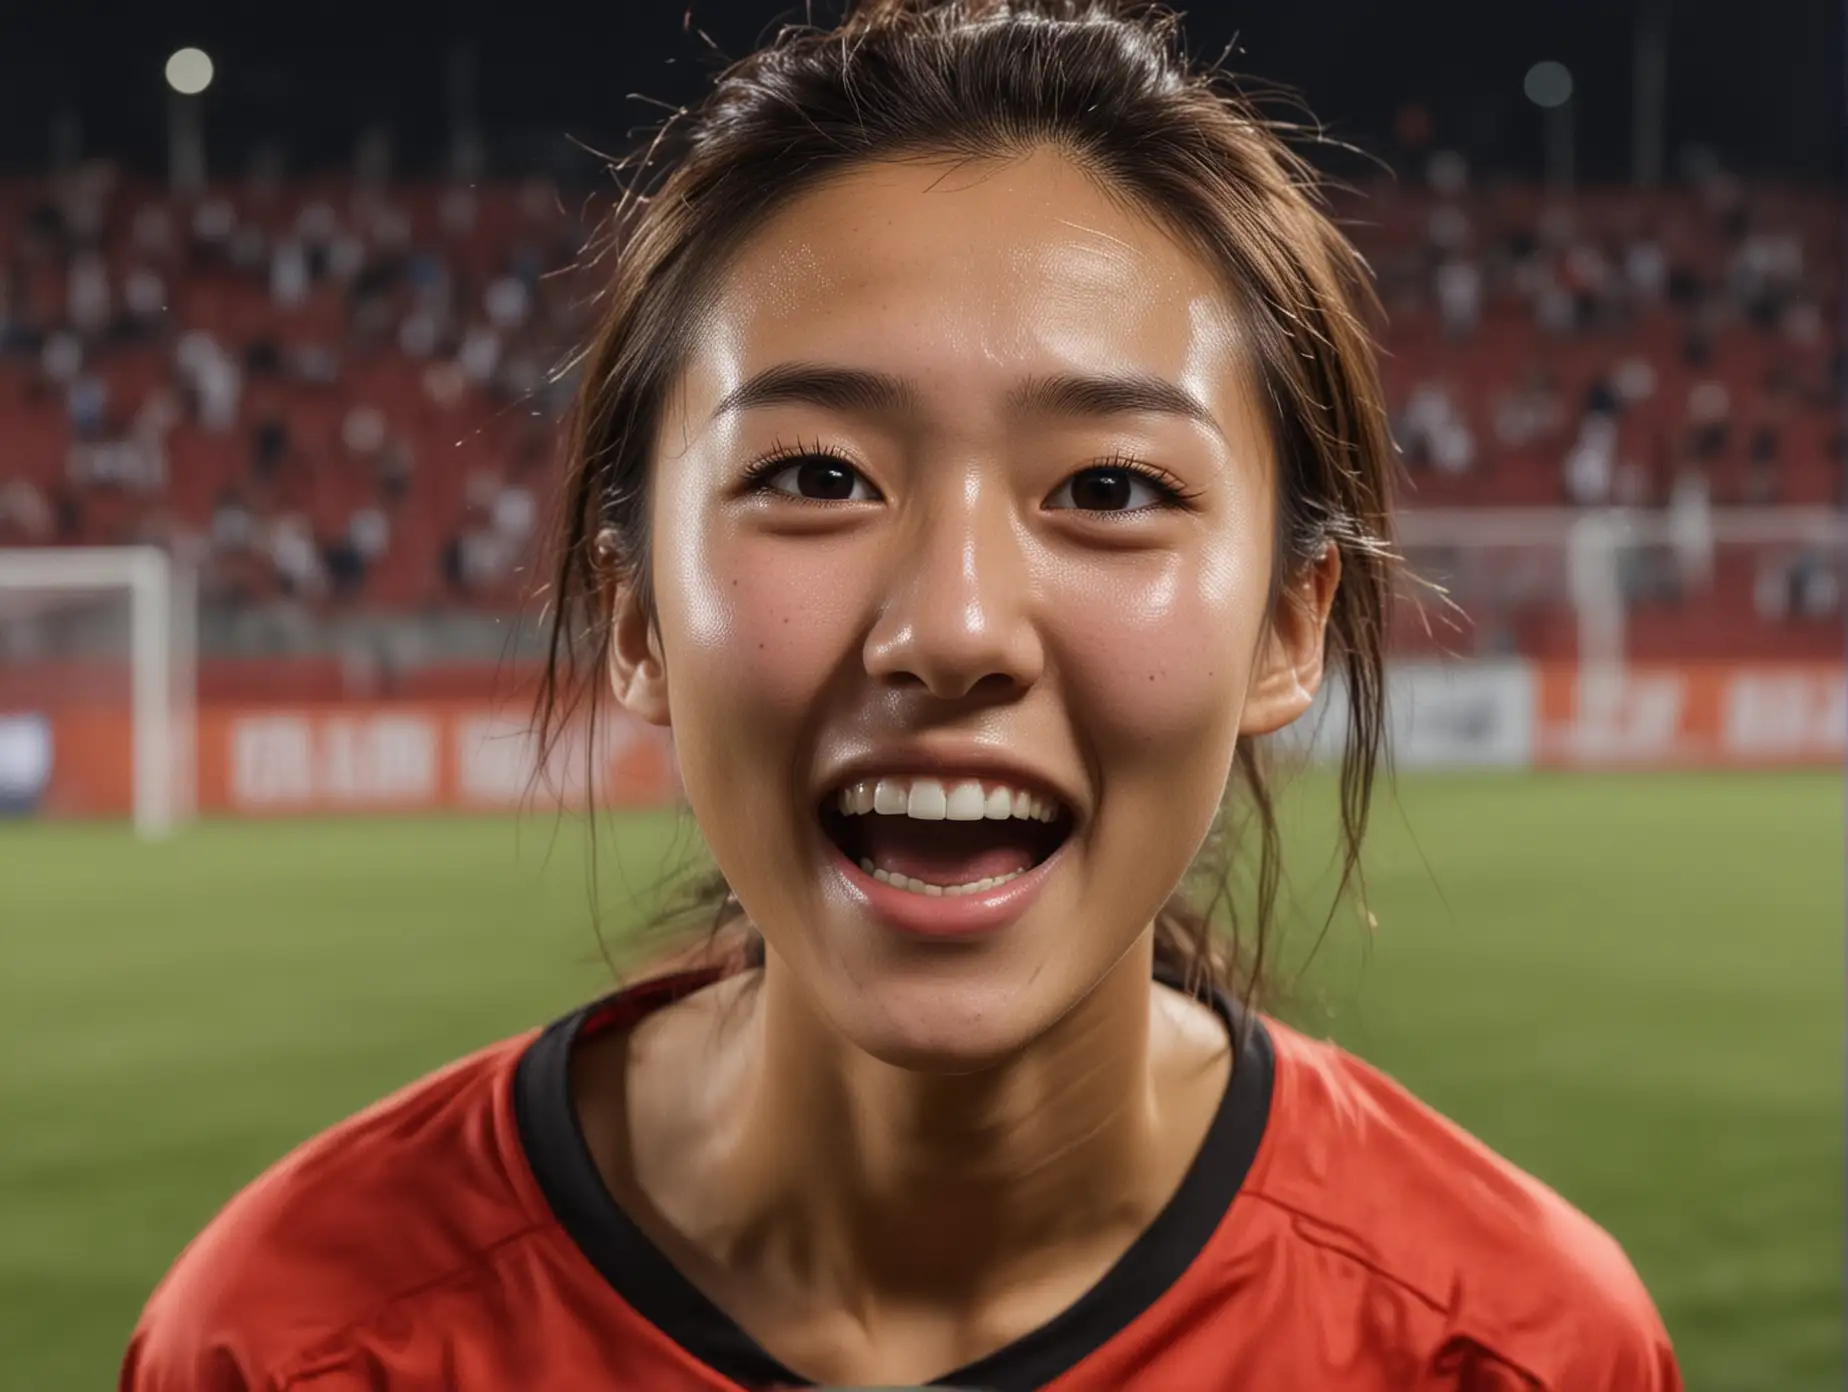 close up face of a beautiful skinny women's college soccer player from Shenyang China without makeup celebrating moments after scoring a glorious goal, overwhelmed with joy and excitement. she has